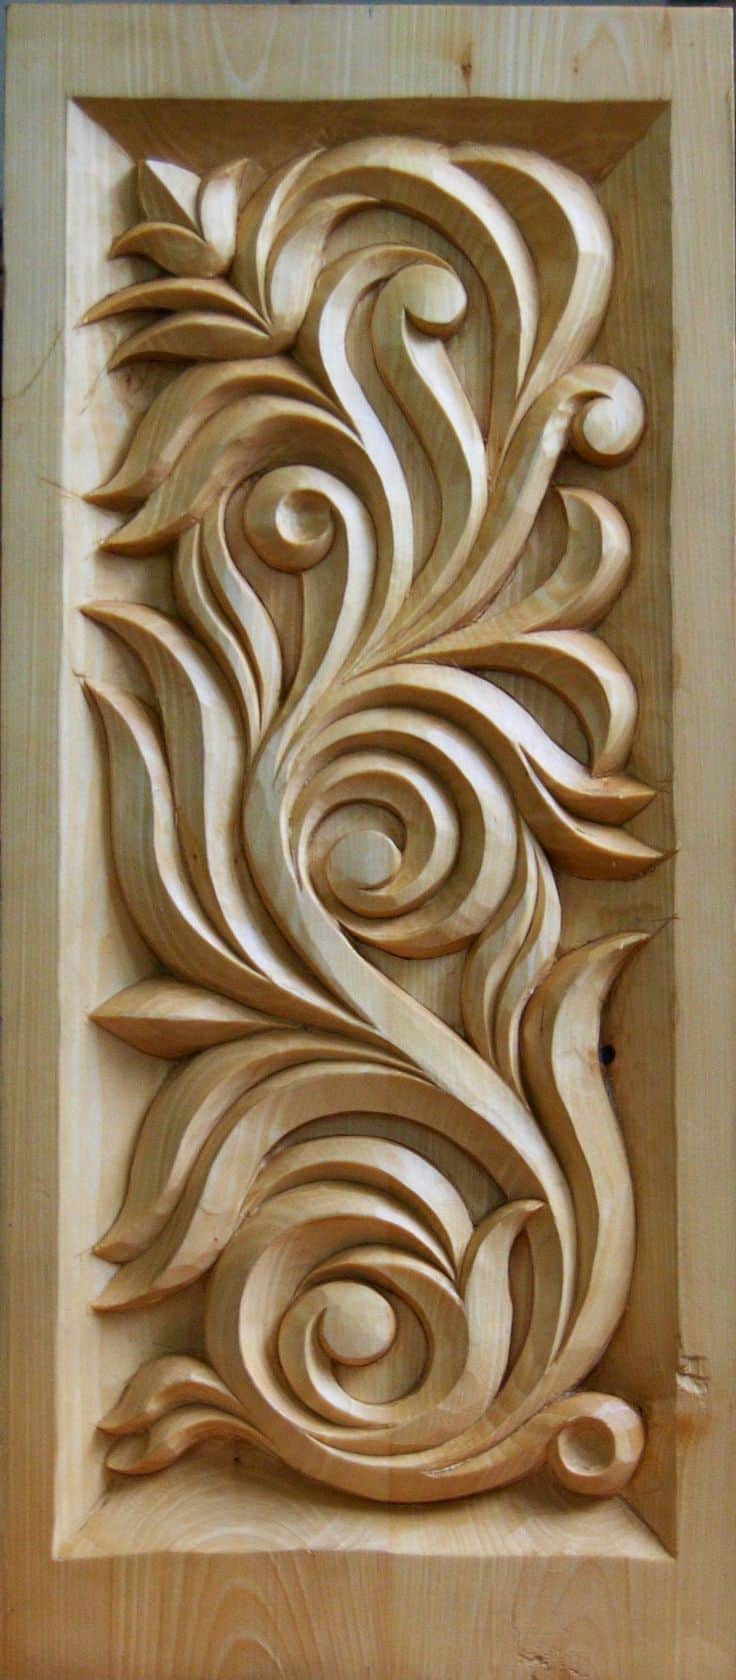 20 Wood Carving Ideas For a Rustic Home Decor (19)